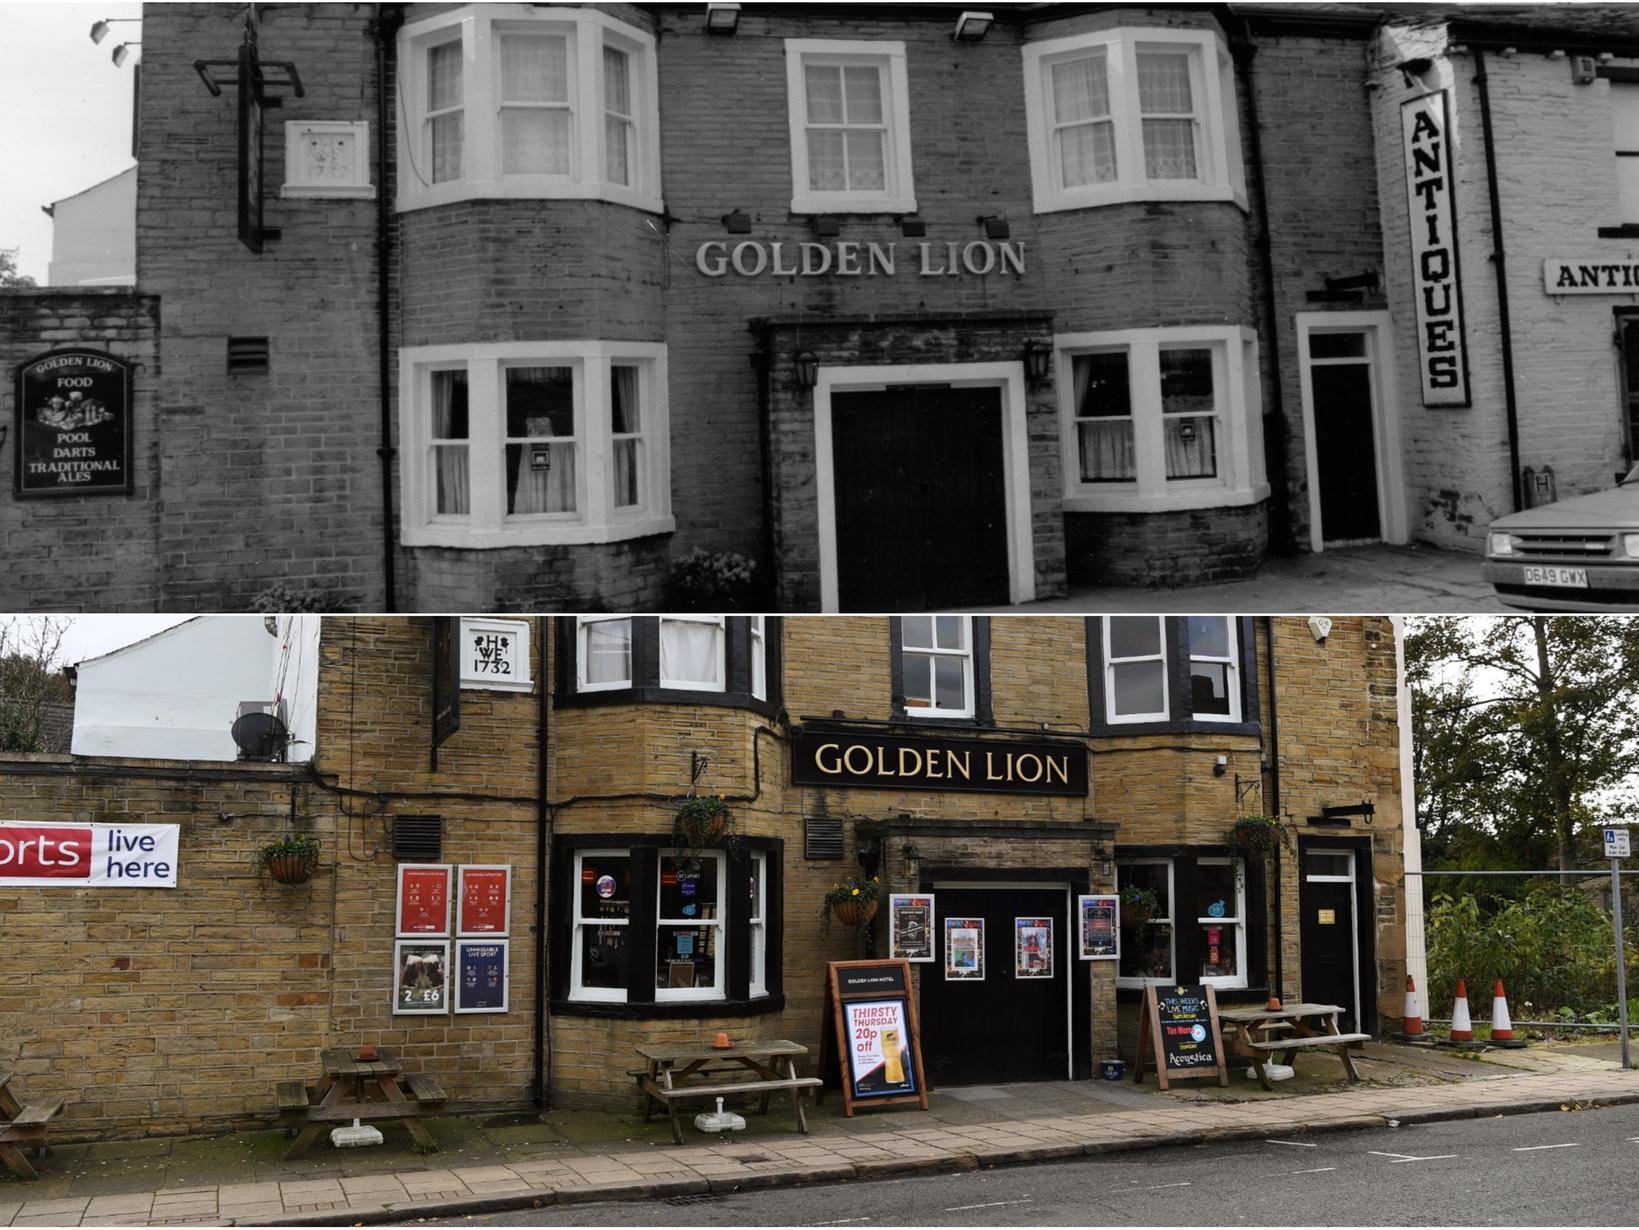 Pudsey Chapeltown's Golden Lion pub in 1991 and 2019.